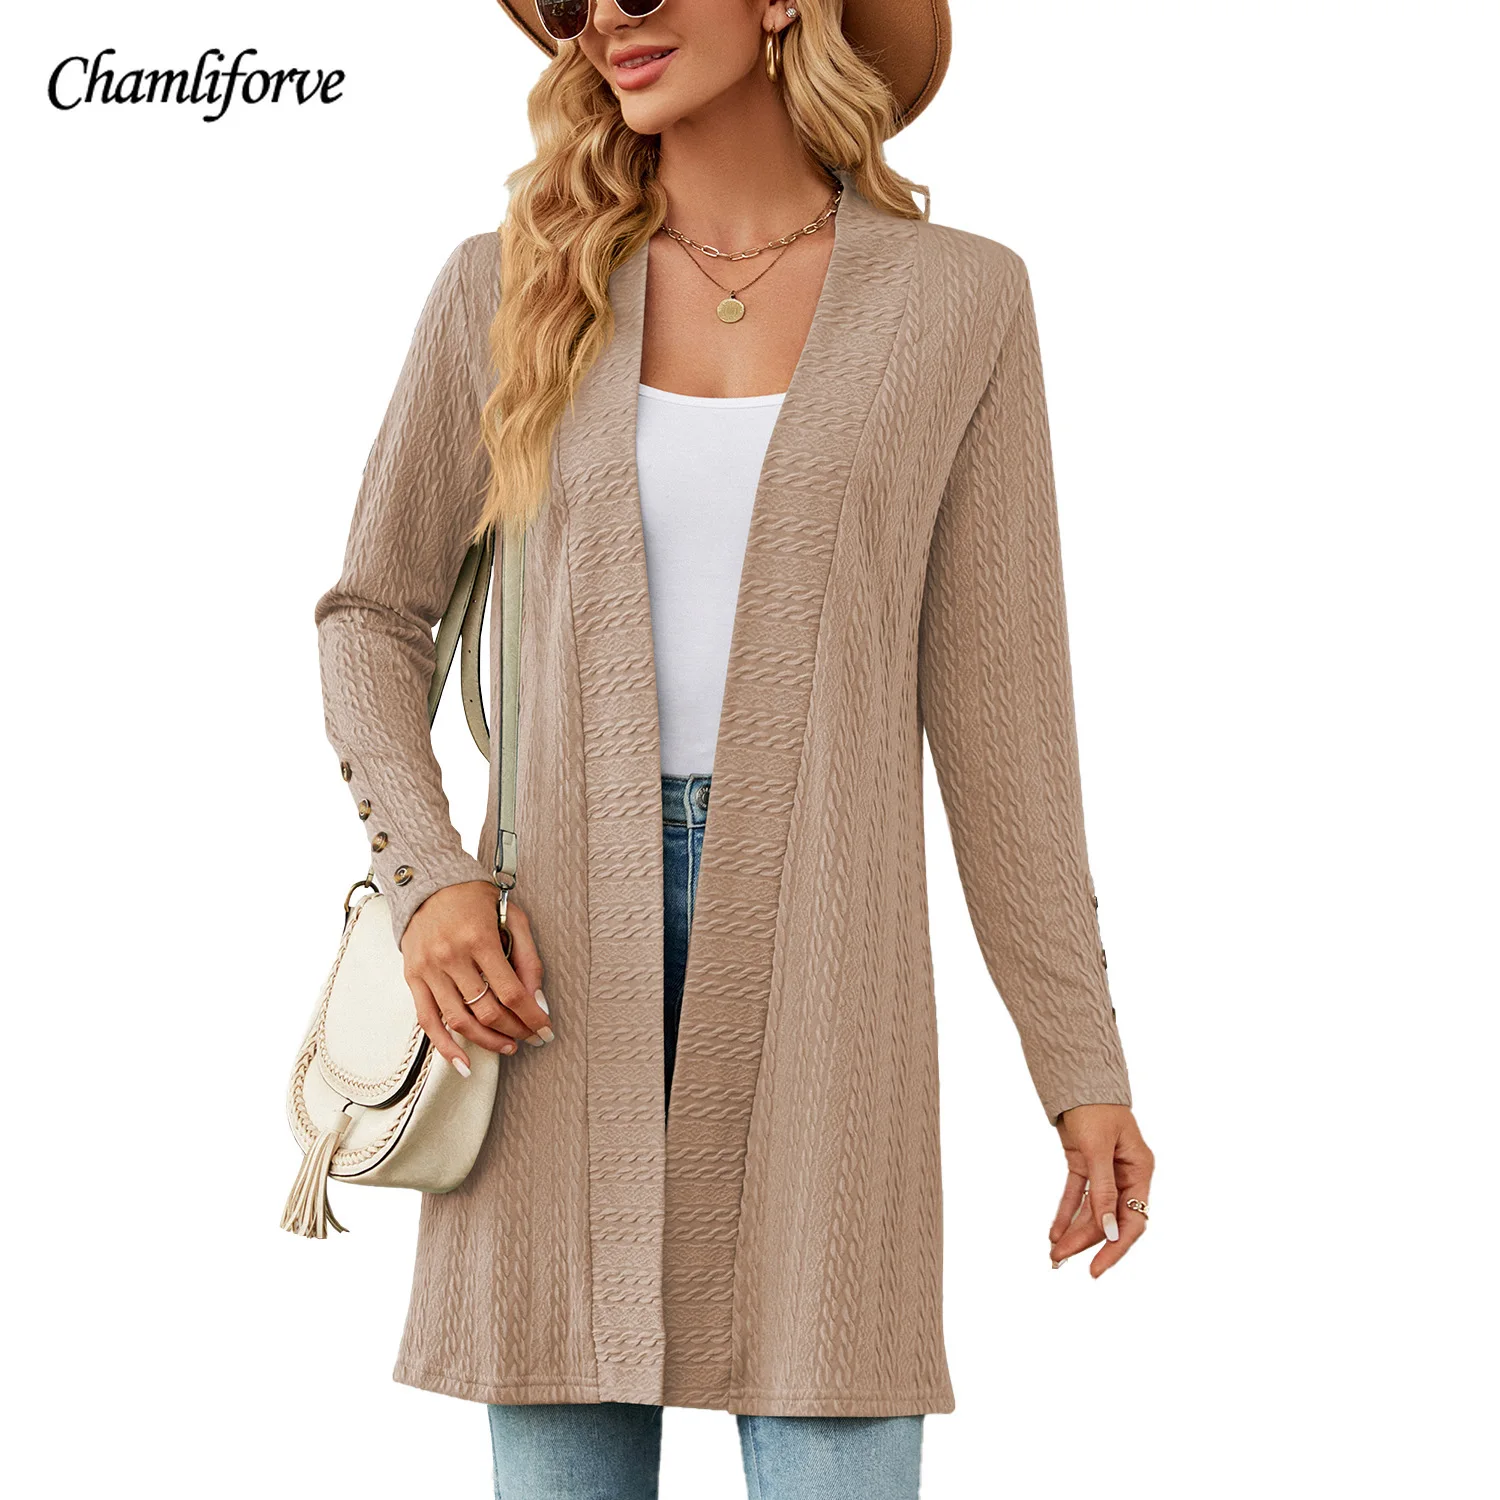 chamliforve 2023 autumn and winter new solid color button long sleeve loose cardigan coat for women coat women winter jacket 2023 new winter coat crop top hoodie knitted sweater hollow out top women pollover solid loose long sleeve casual autumn tops